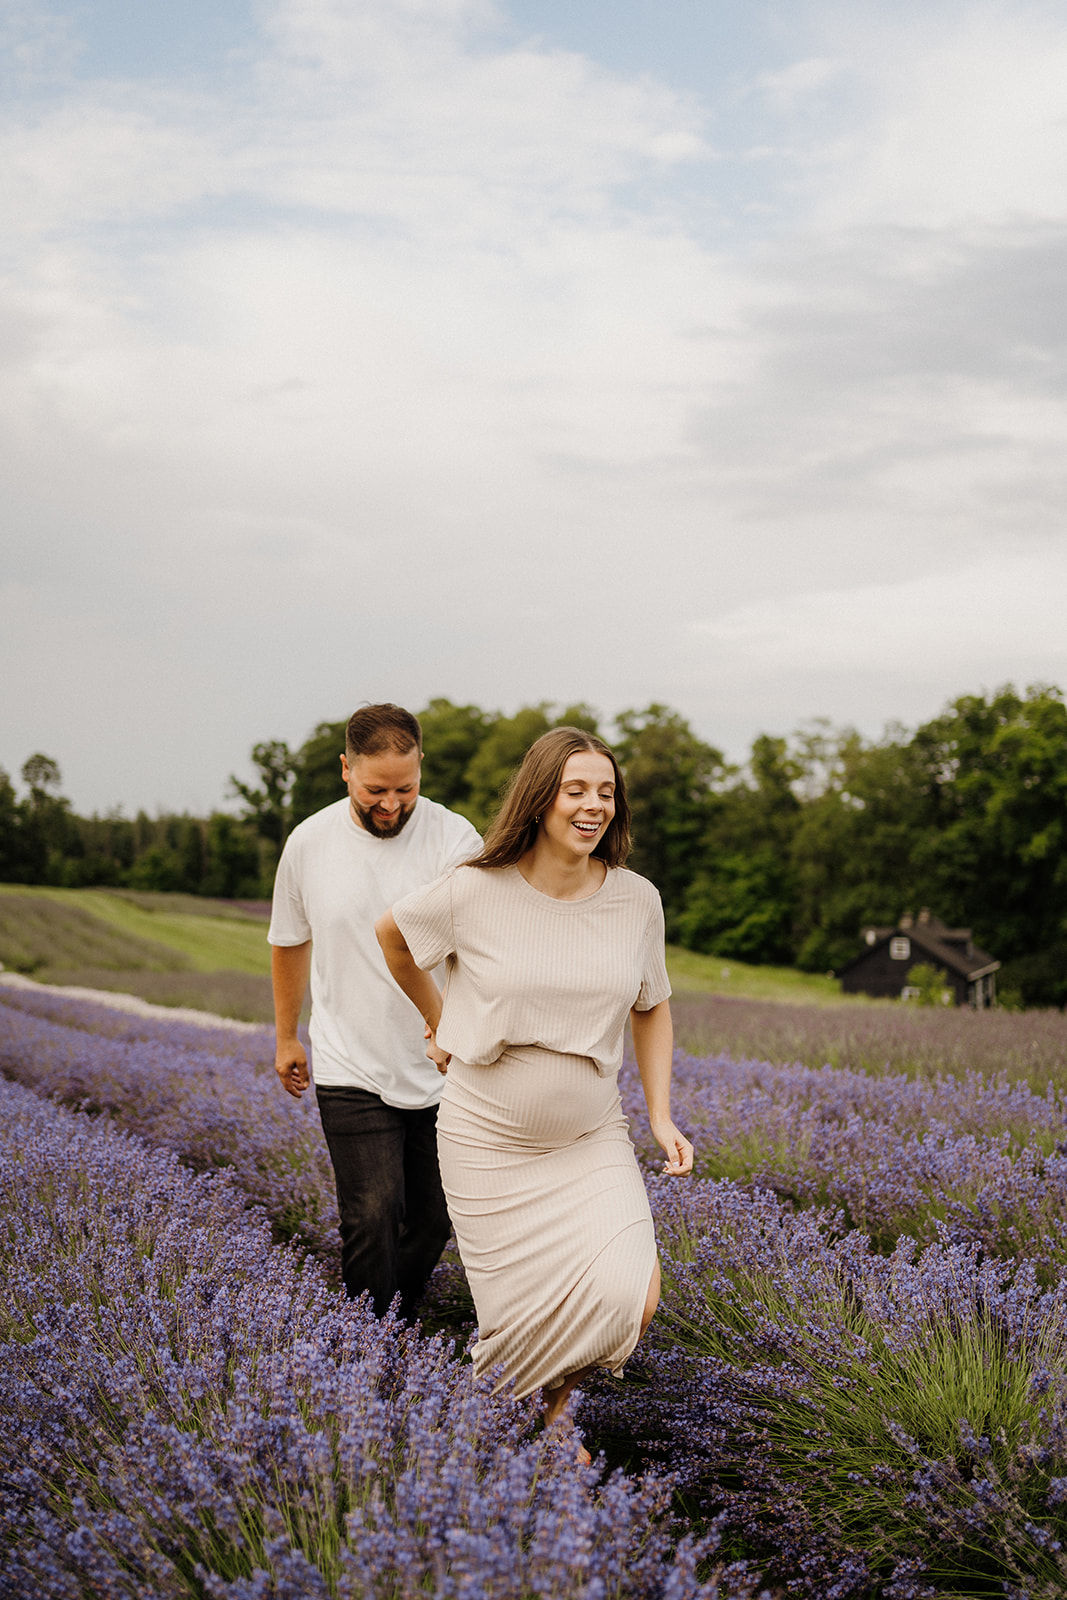 Woman holds the man's hand while walking in front of him in the lavender fields.